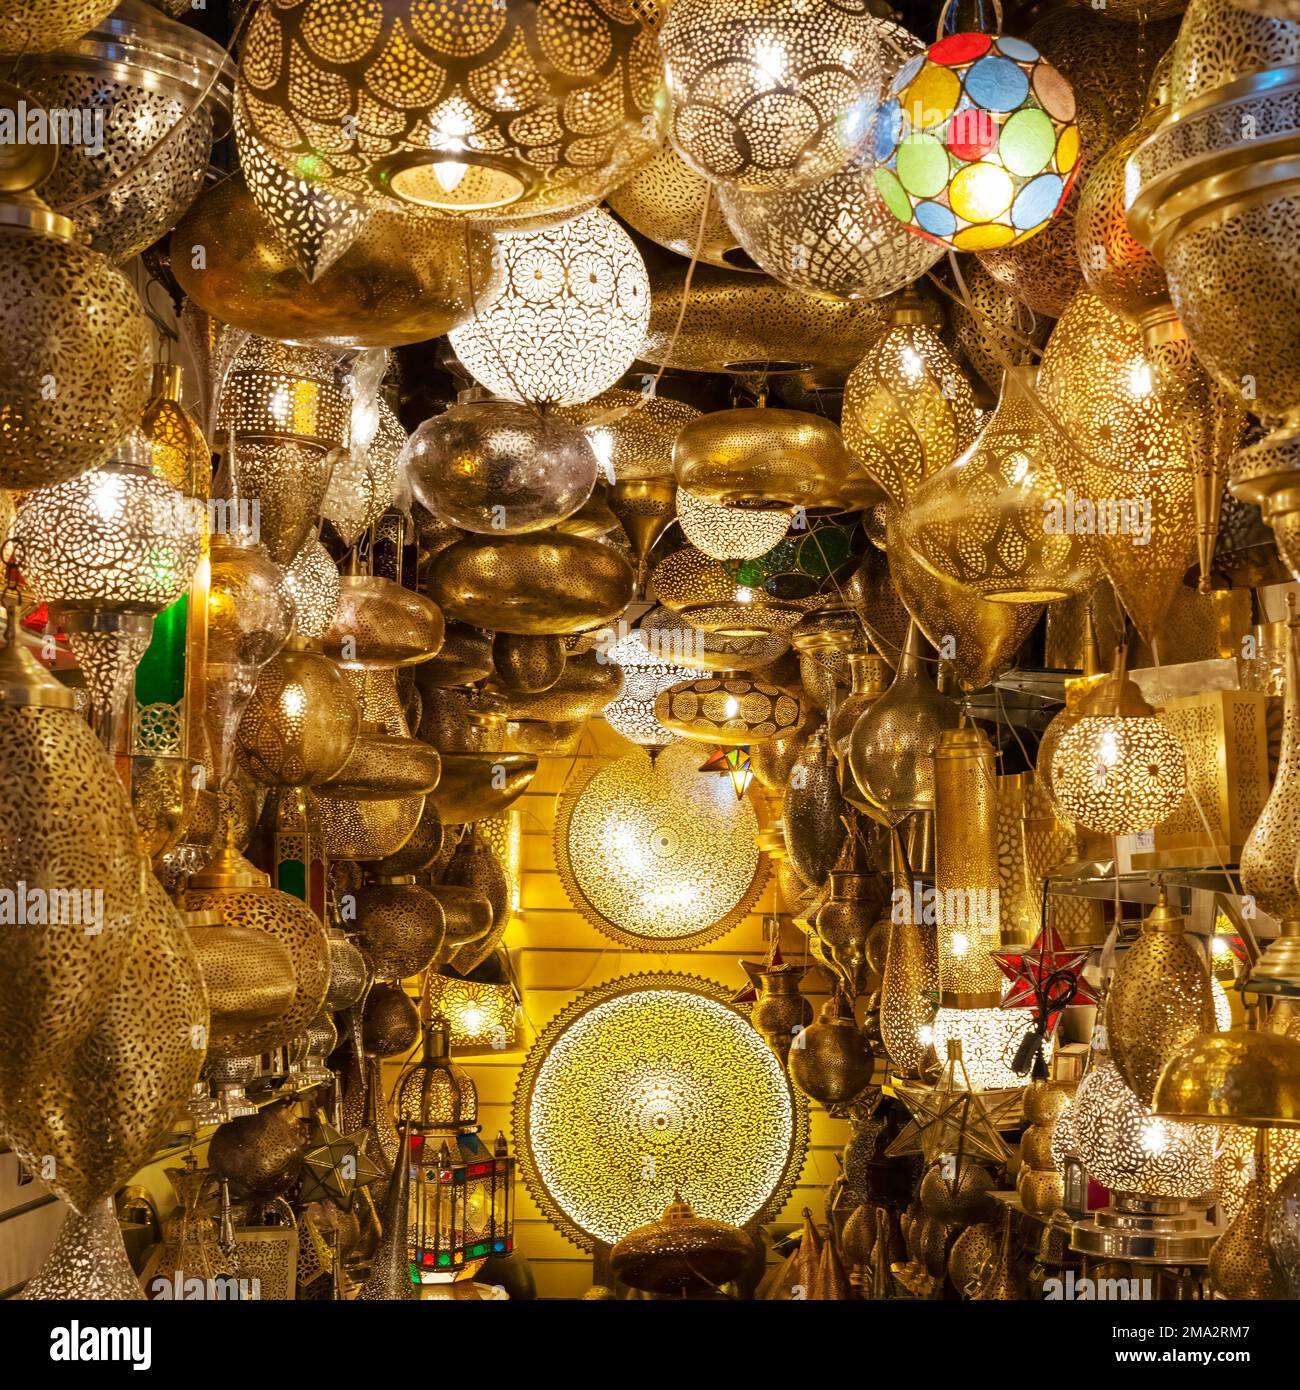 Vertical view of lighting shop in a market of marrakech, Morocco Stock Photo